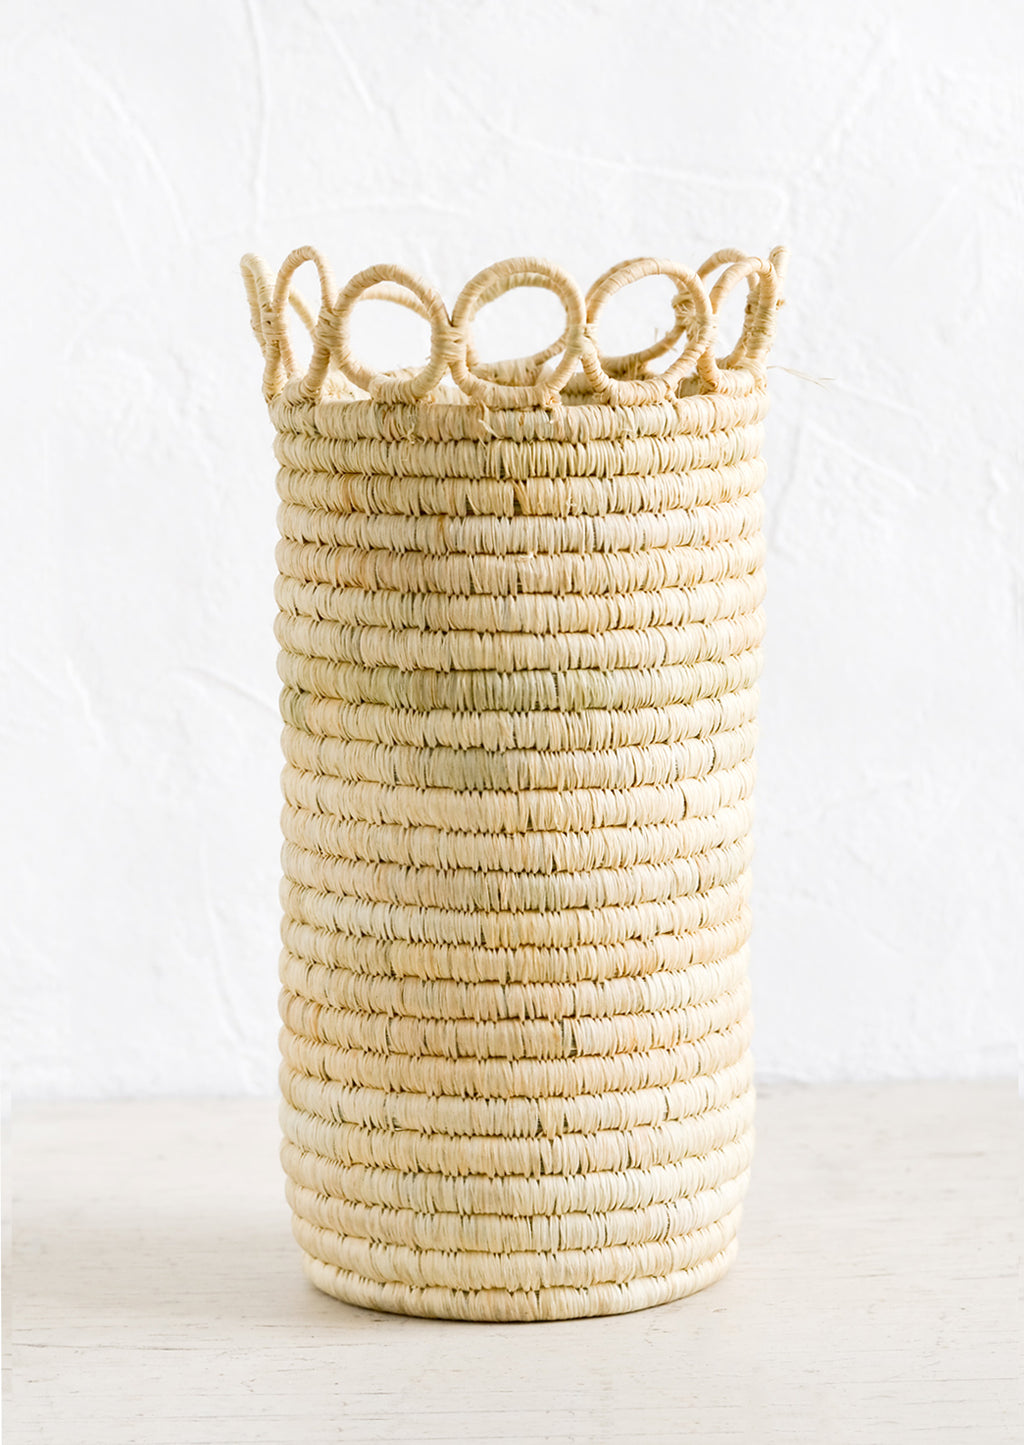 1: A tall, cylindrical vase in natural raffia with open circle trim along top.